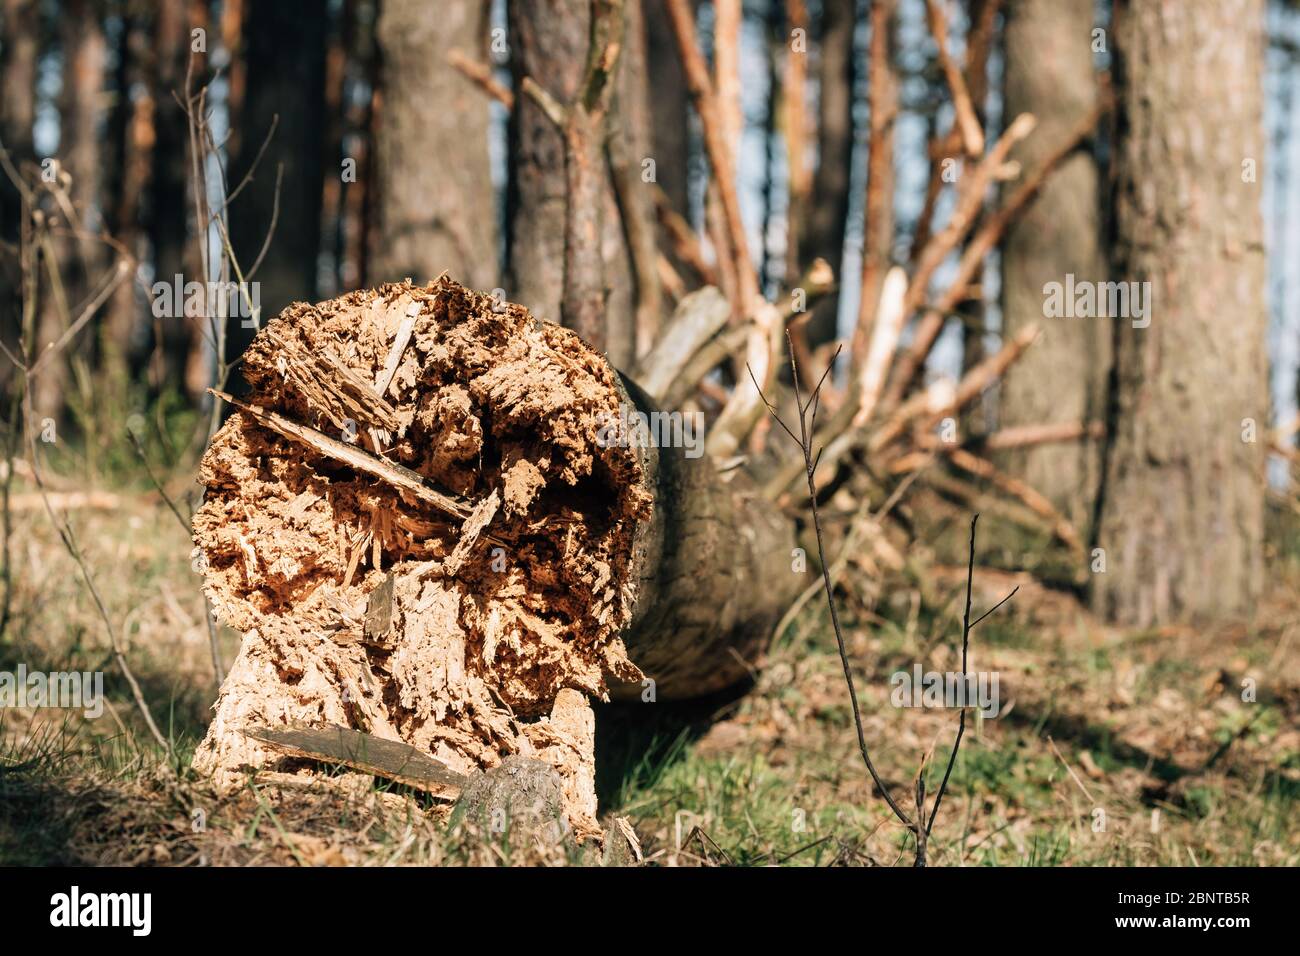 Fallen Old Pine Tree Trunk. Windfall In Forest. Storm Damage. Fallen Tree In Coniferous Forest After Strong Hurricane Wind Stock Photo